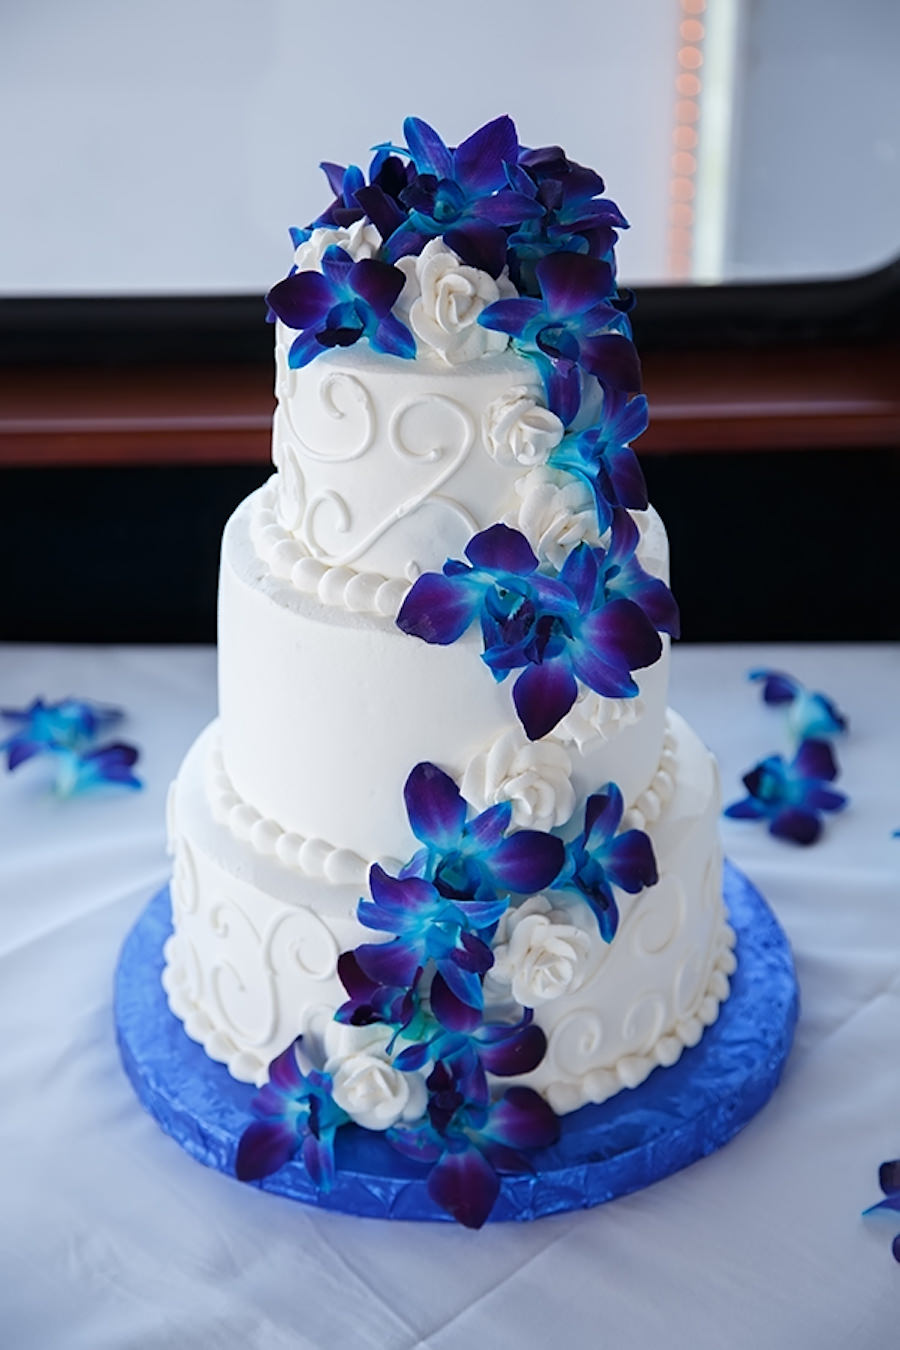 Round White Wedding Cake with Swirls and Blue Orchid Flowers